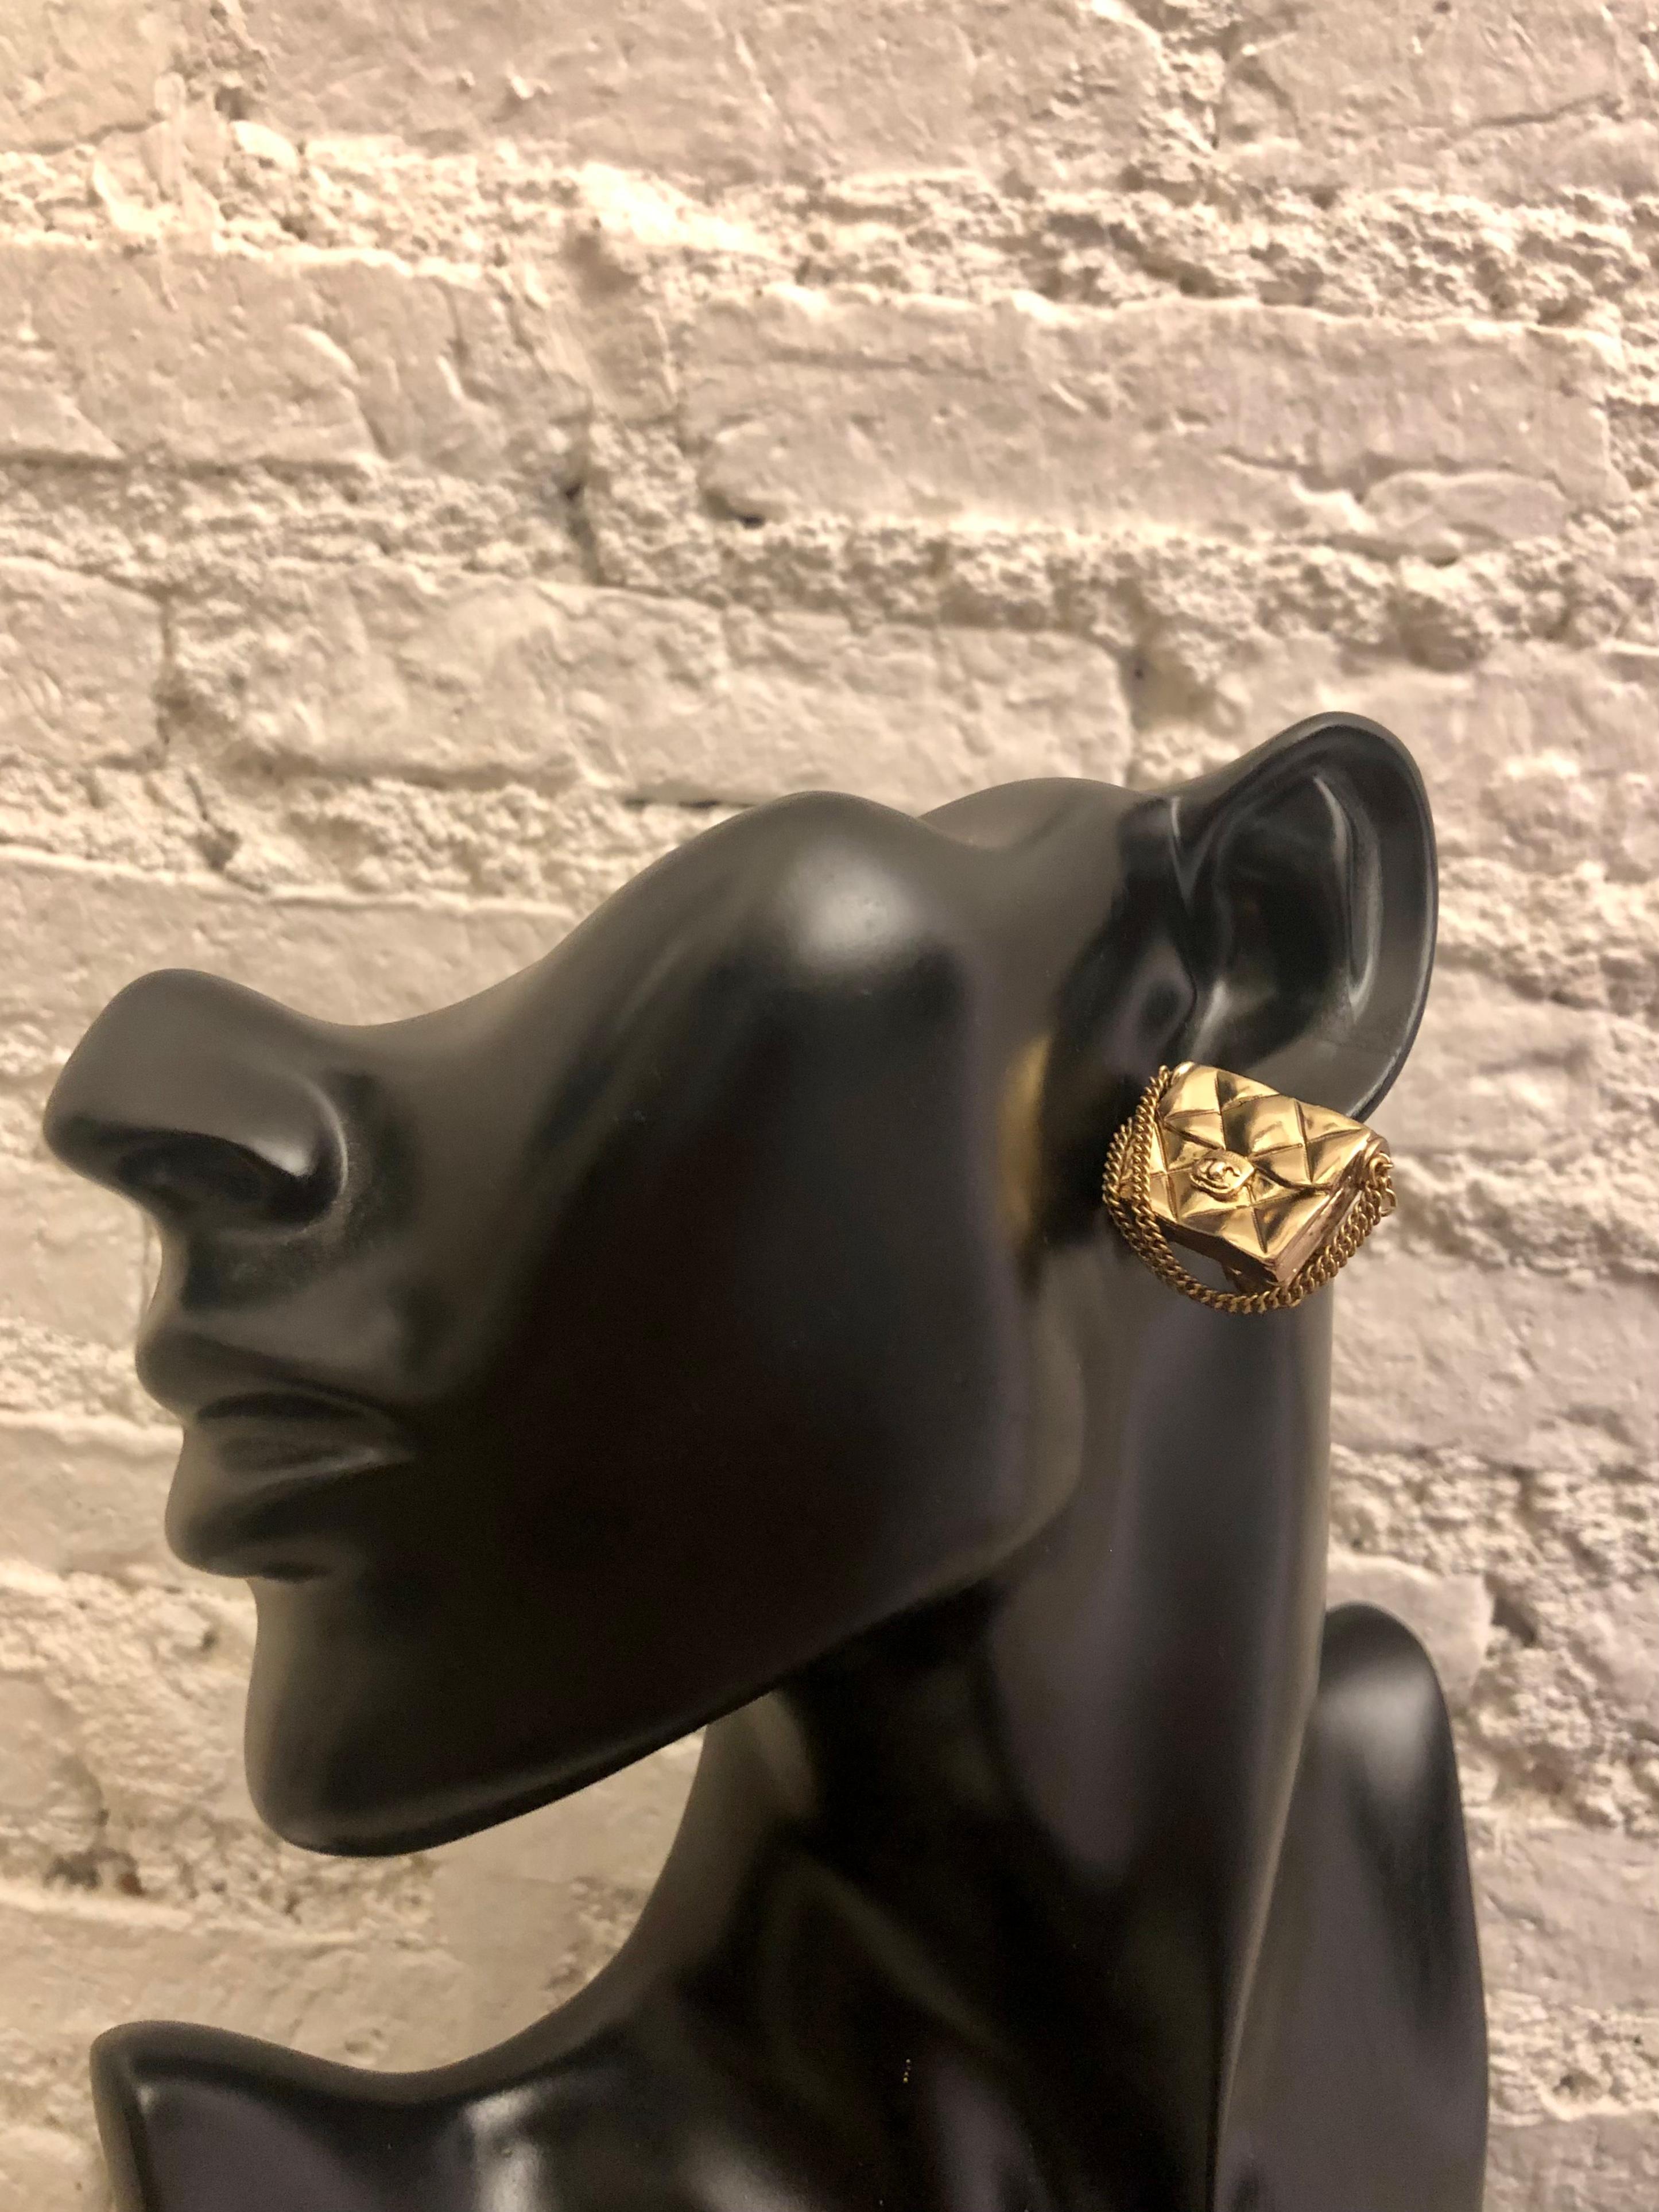 2002 Chanel gold toned earclips featuring a quilted Chanel flap bag motif. Stamped 02P made in France. Measures approximately 2.4 x 1.7 cm. Clip on style. Come with box.

Condition: Minimal signs of wear in excellent condition